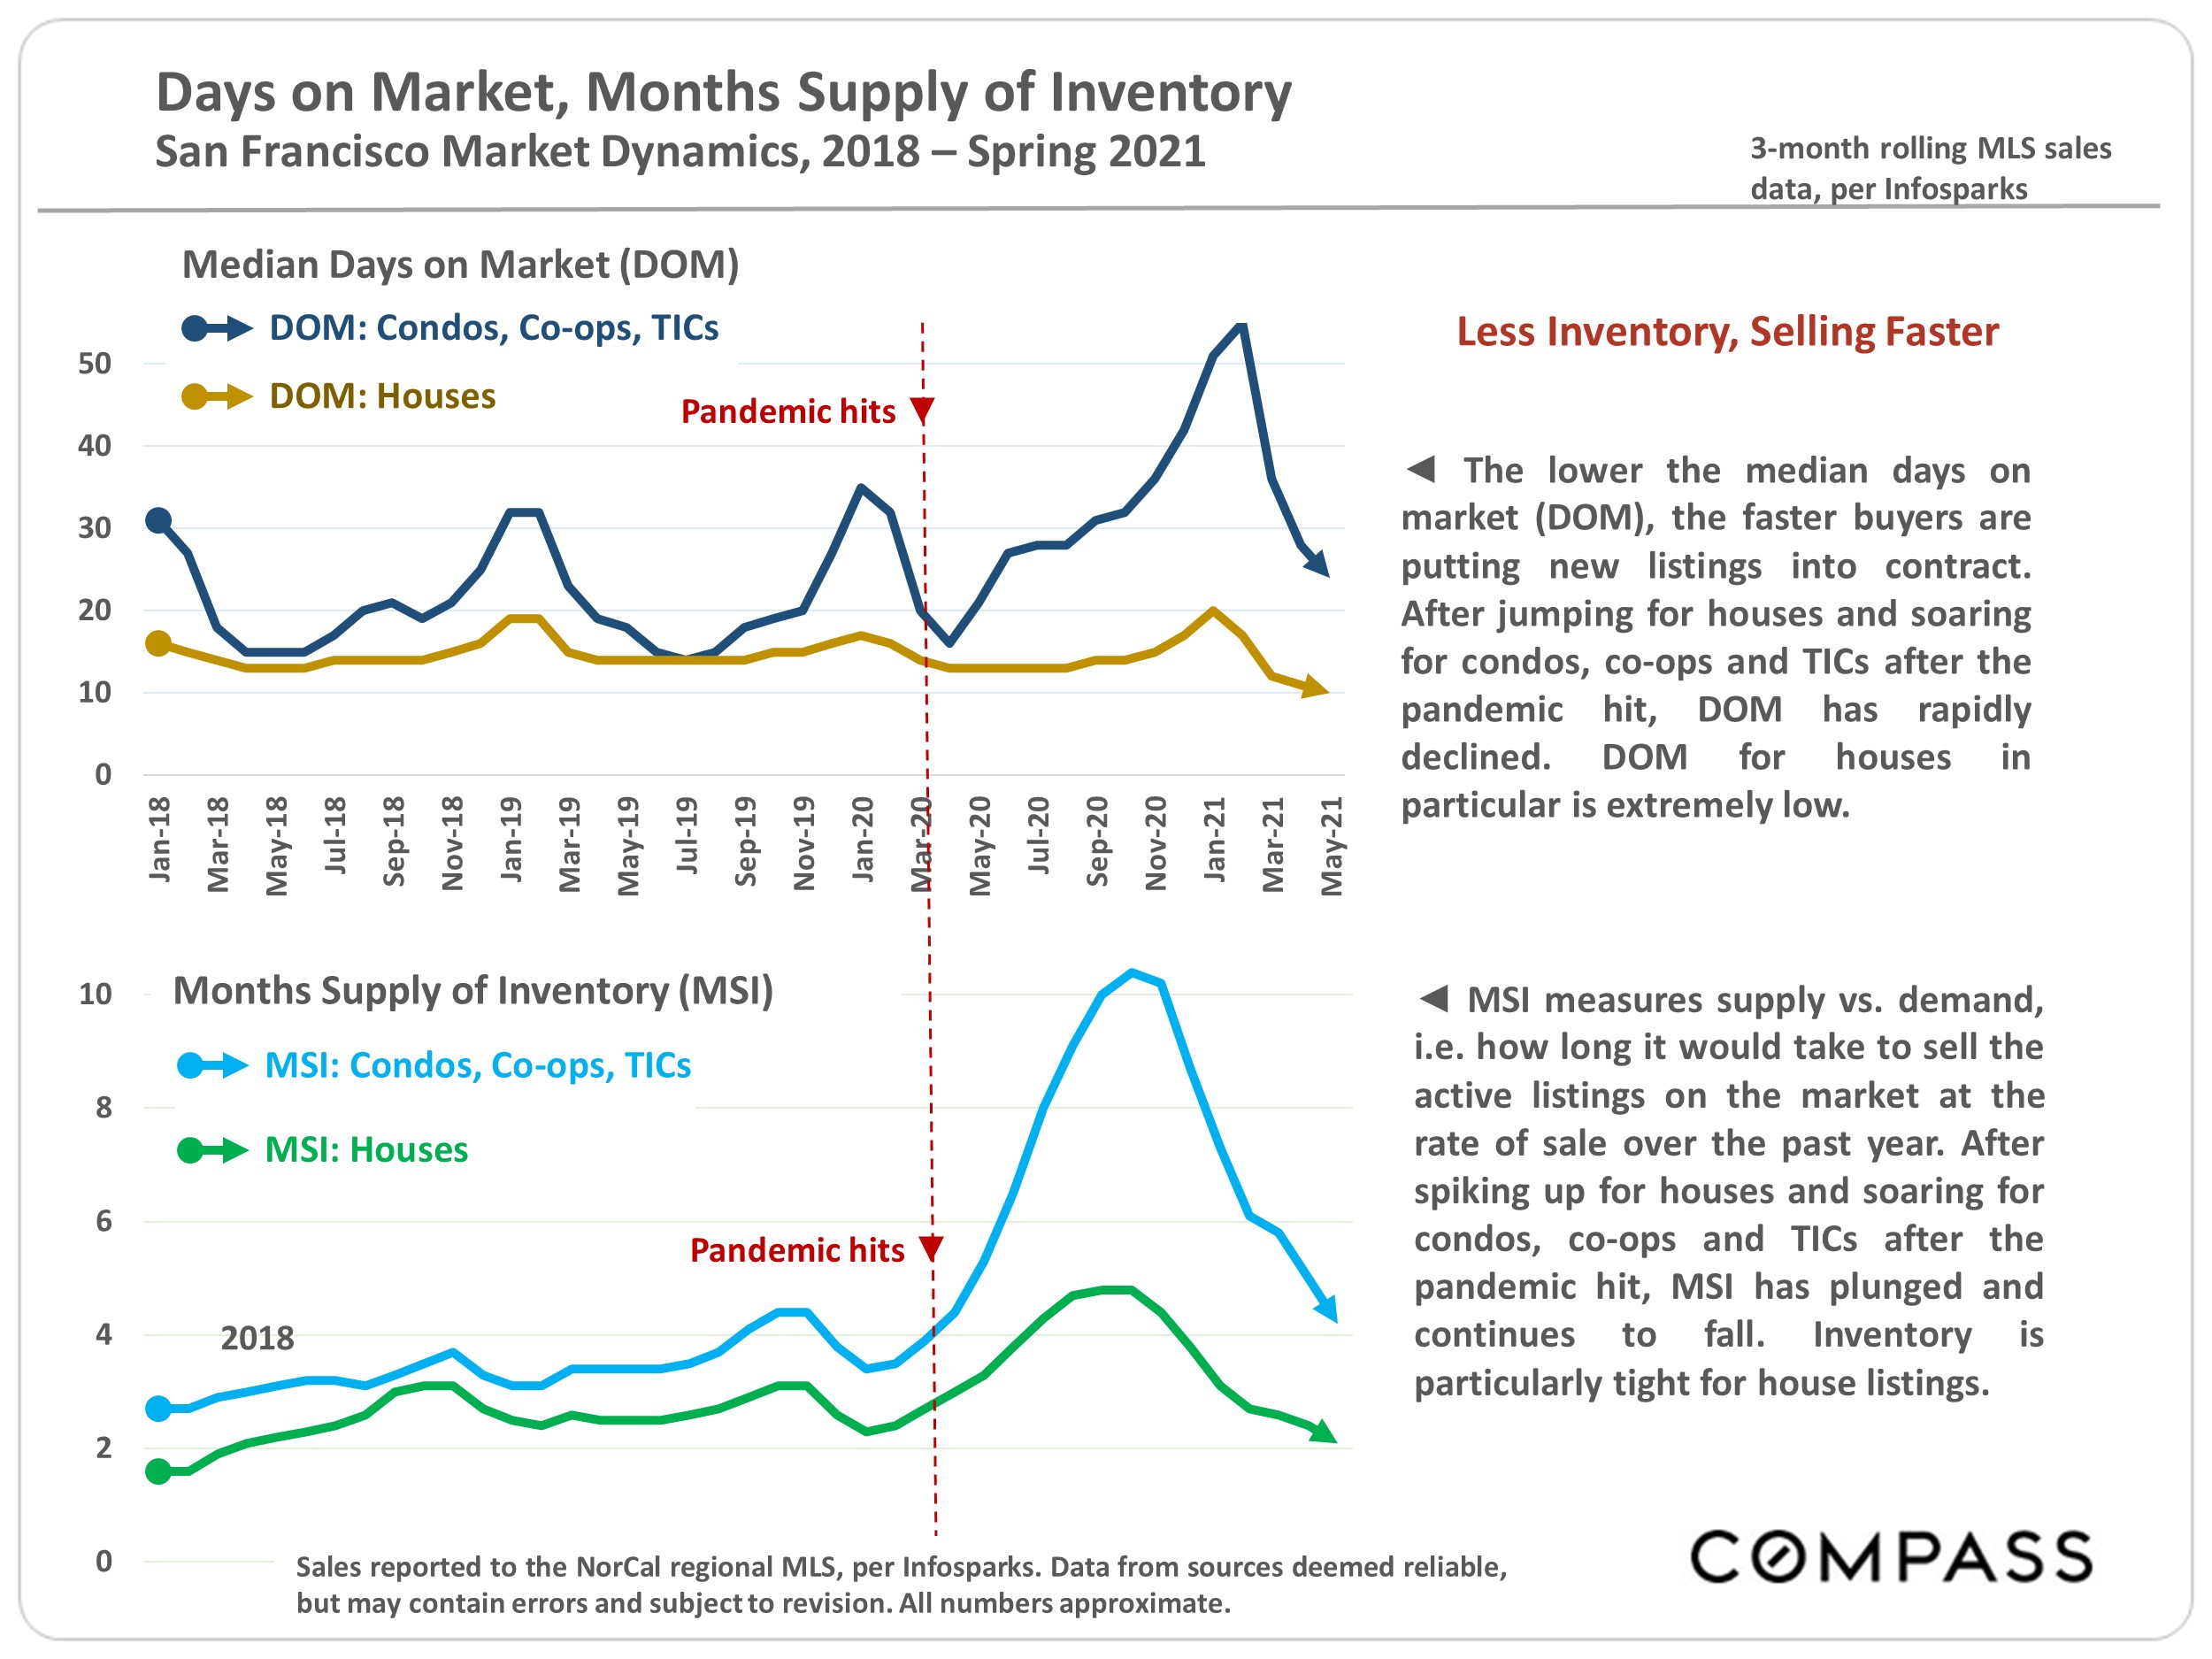 Charts showing the Days on Market, Months Supply of Inventory, San Francisco Market Dynamics, 2018 - Spring 2021, 3-month rolling MLS sales data